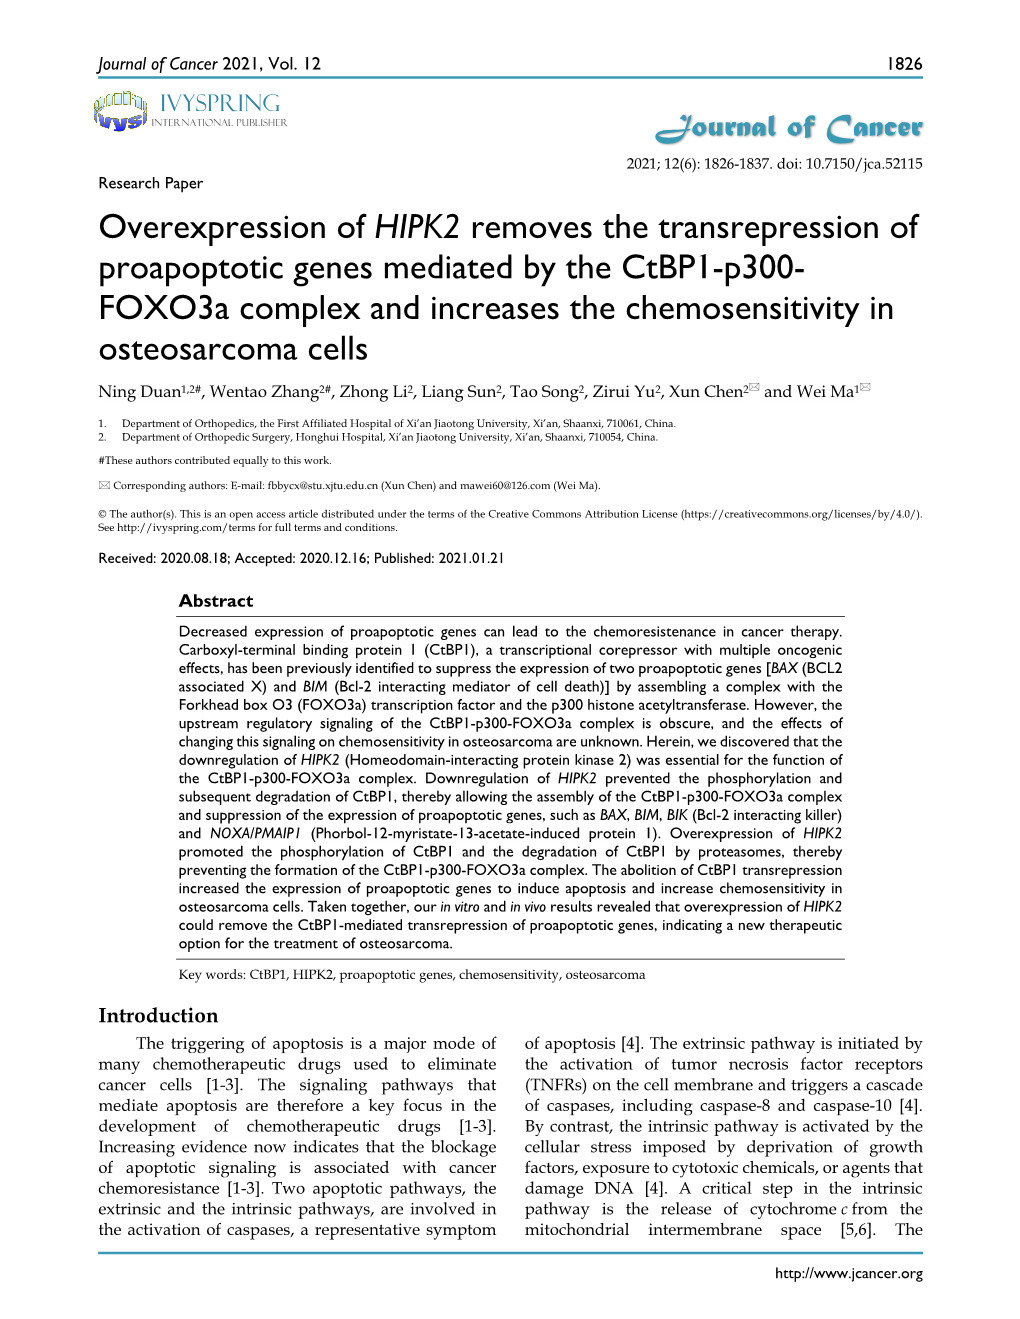 Overexpression of HIPK2 Removes the Transrepression of Proapoptotic Genes Mediated by the Ctbp1-P300